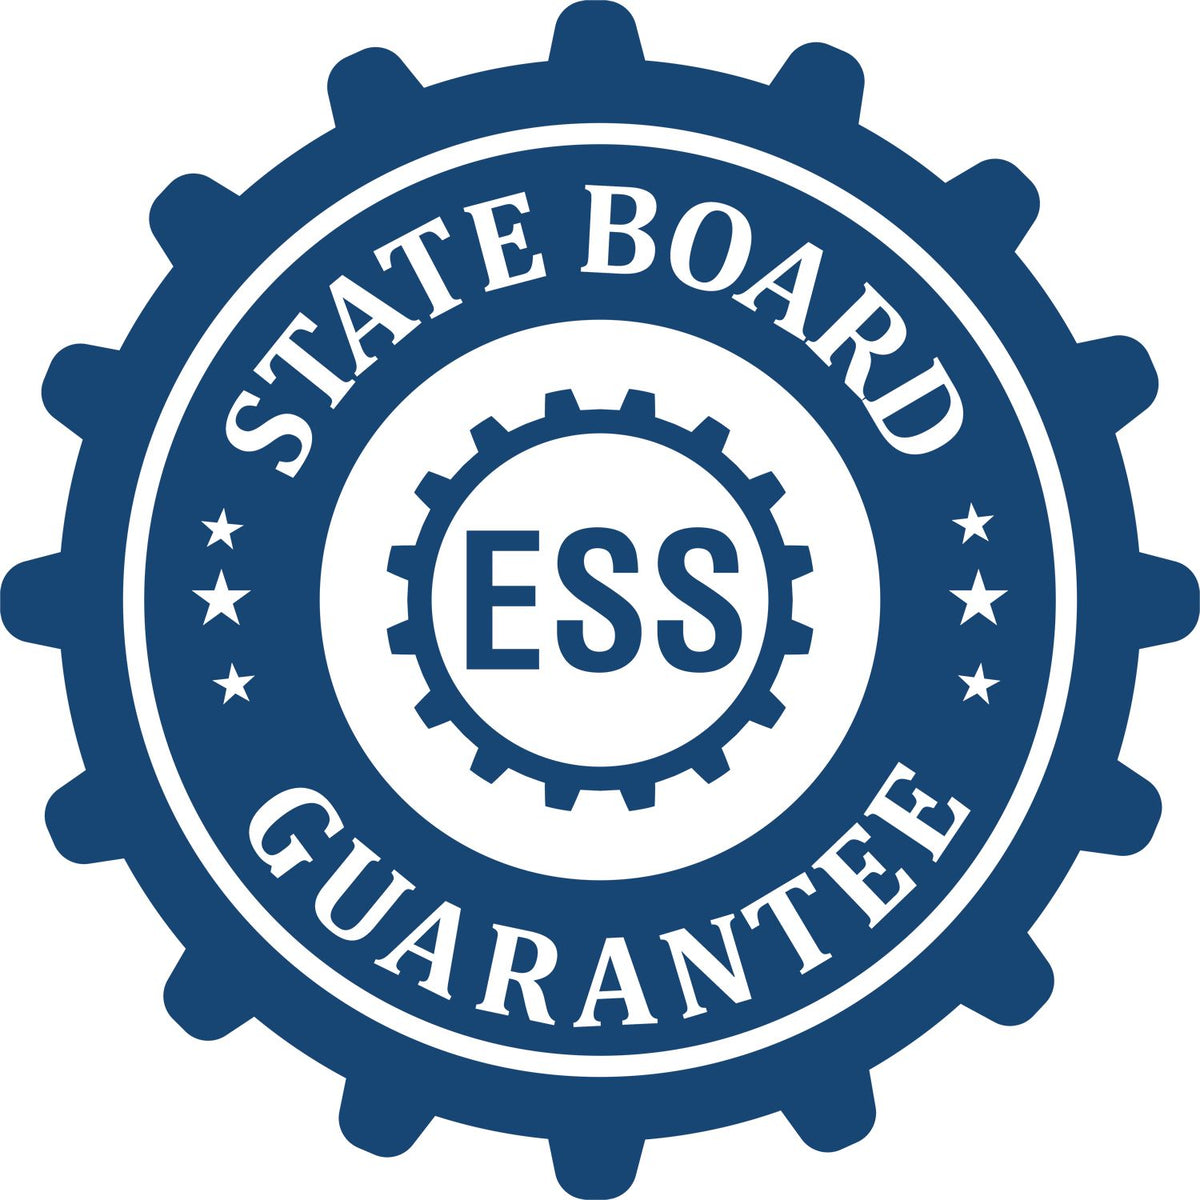 An emblem in a gear shape illustrating a state board guarantee for the Digital Virginia PE Stamp and Electronic Seal for Virginia Engineer product.